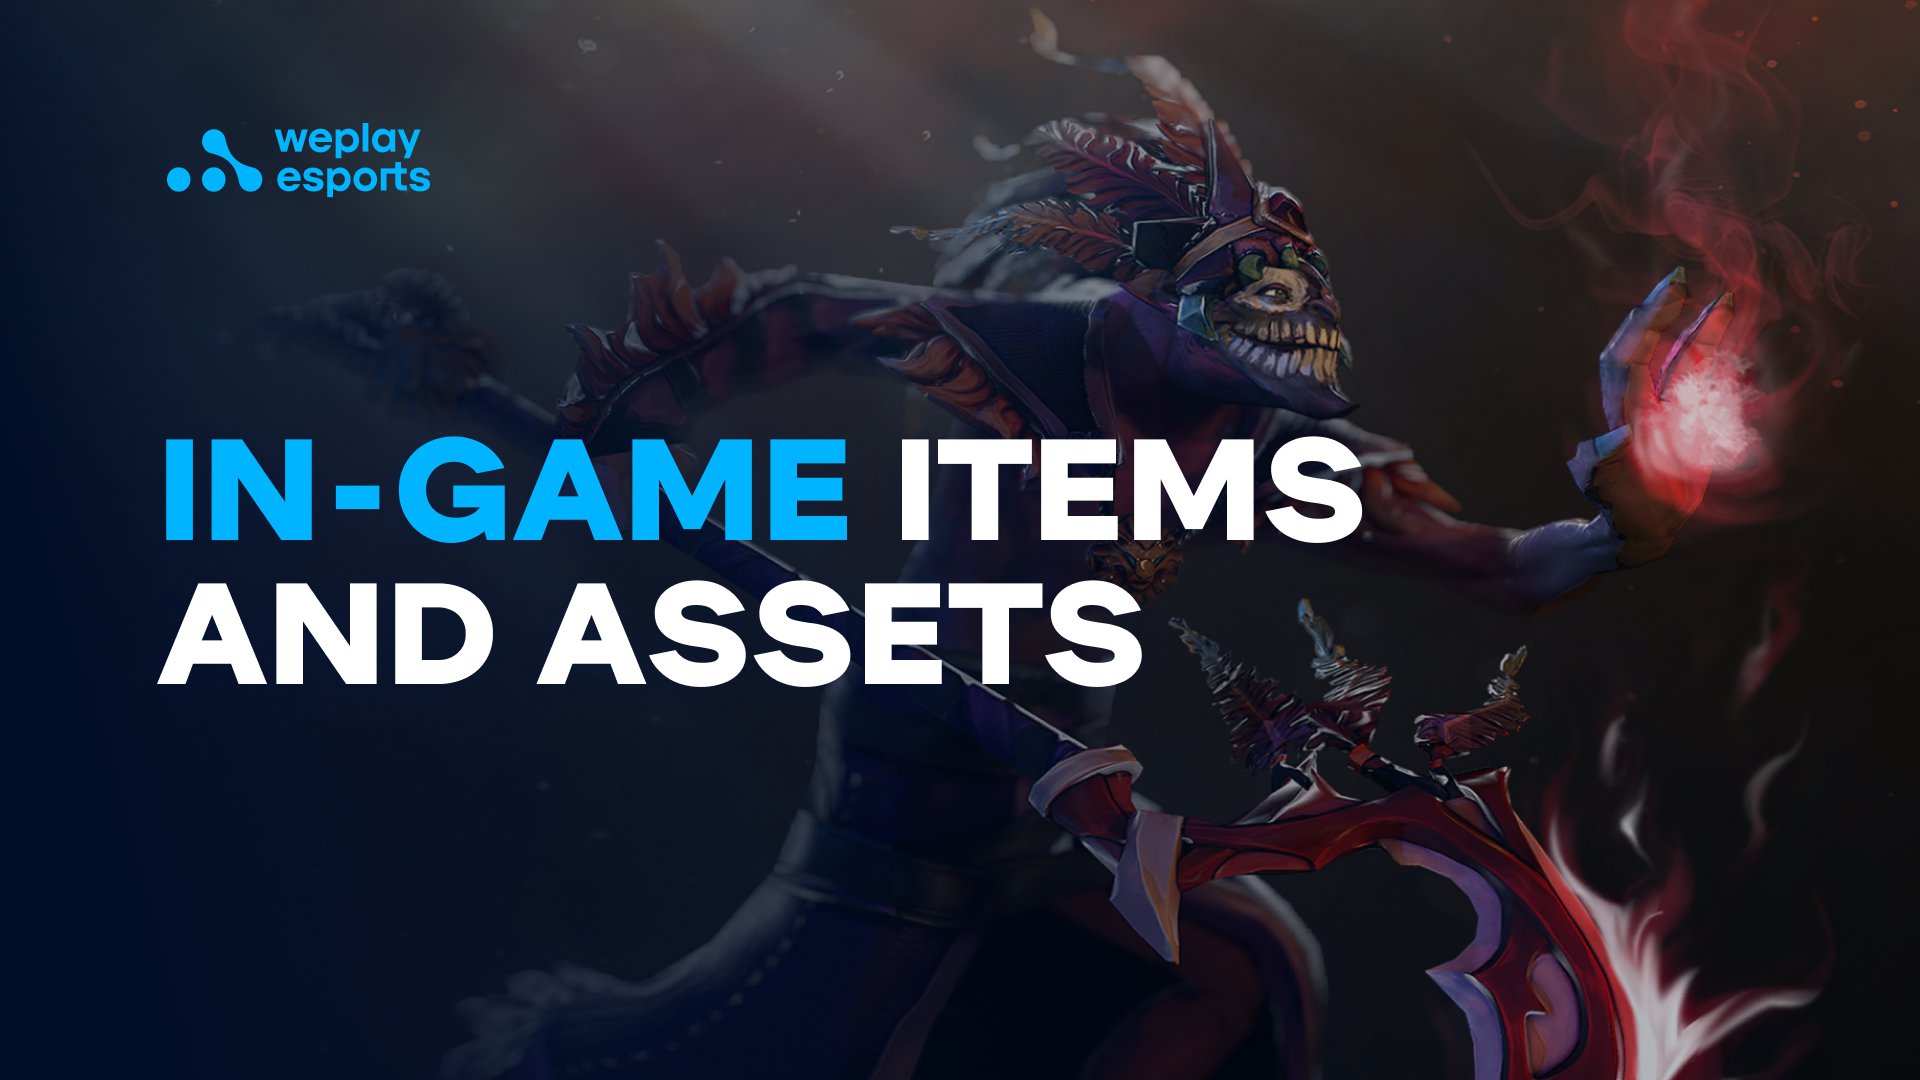 In-game items and assets. Source: WePlay Holding